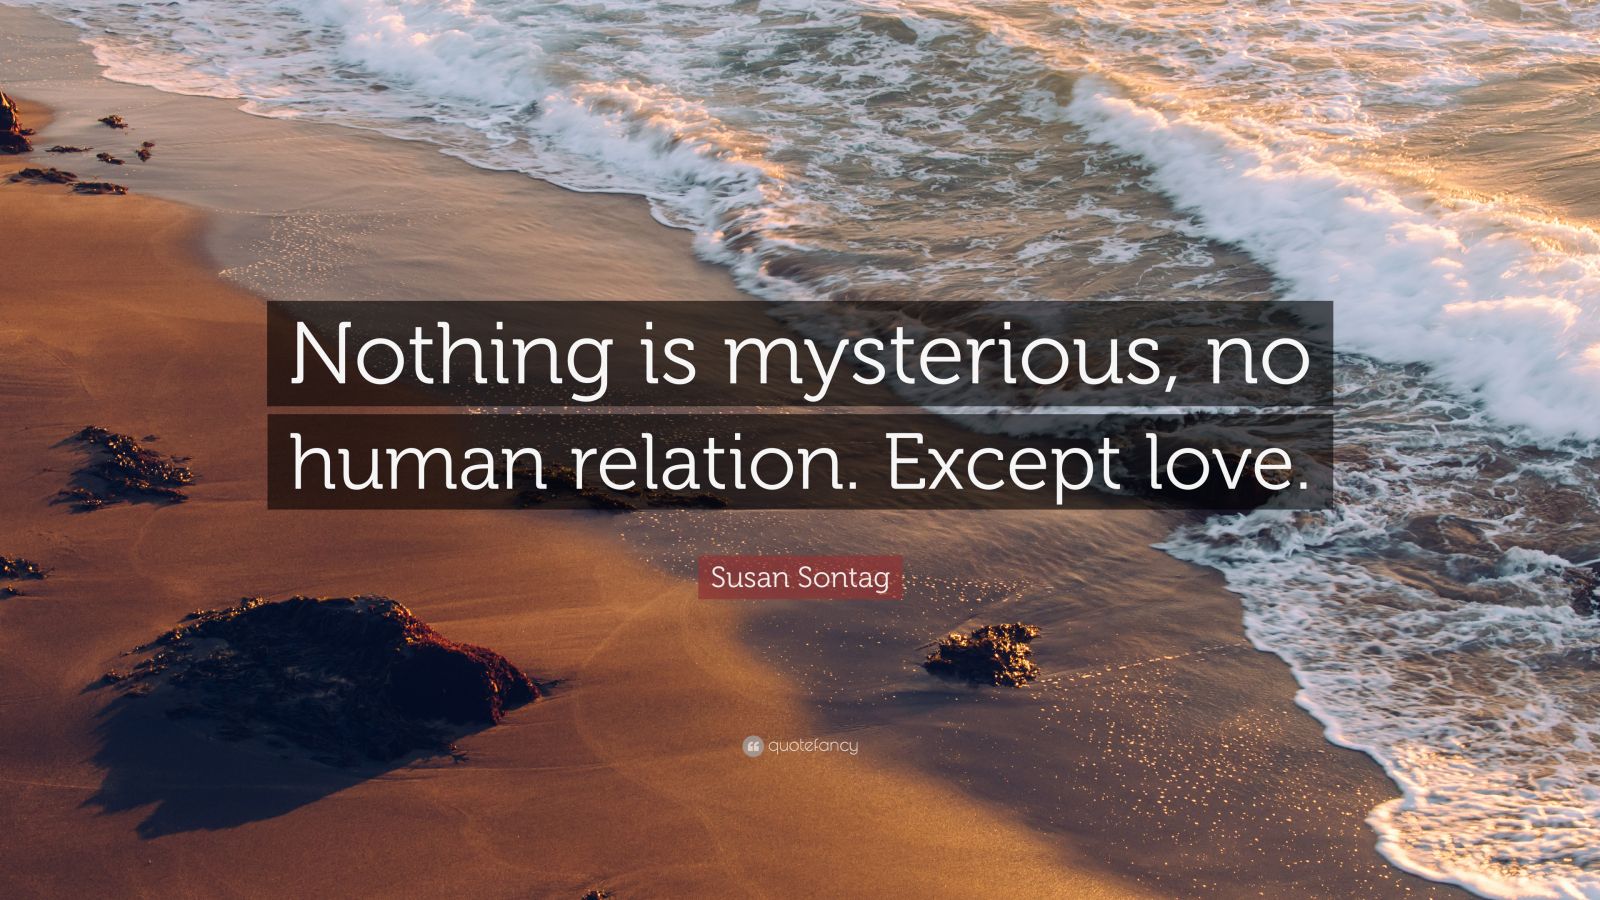 Susan Sontag Quote: “Nothing is mysterious, no human relation. Except ...